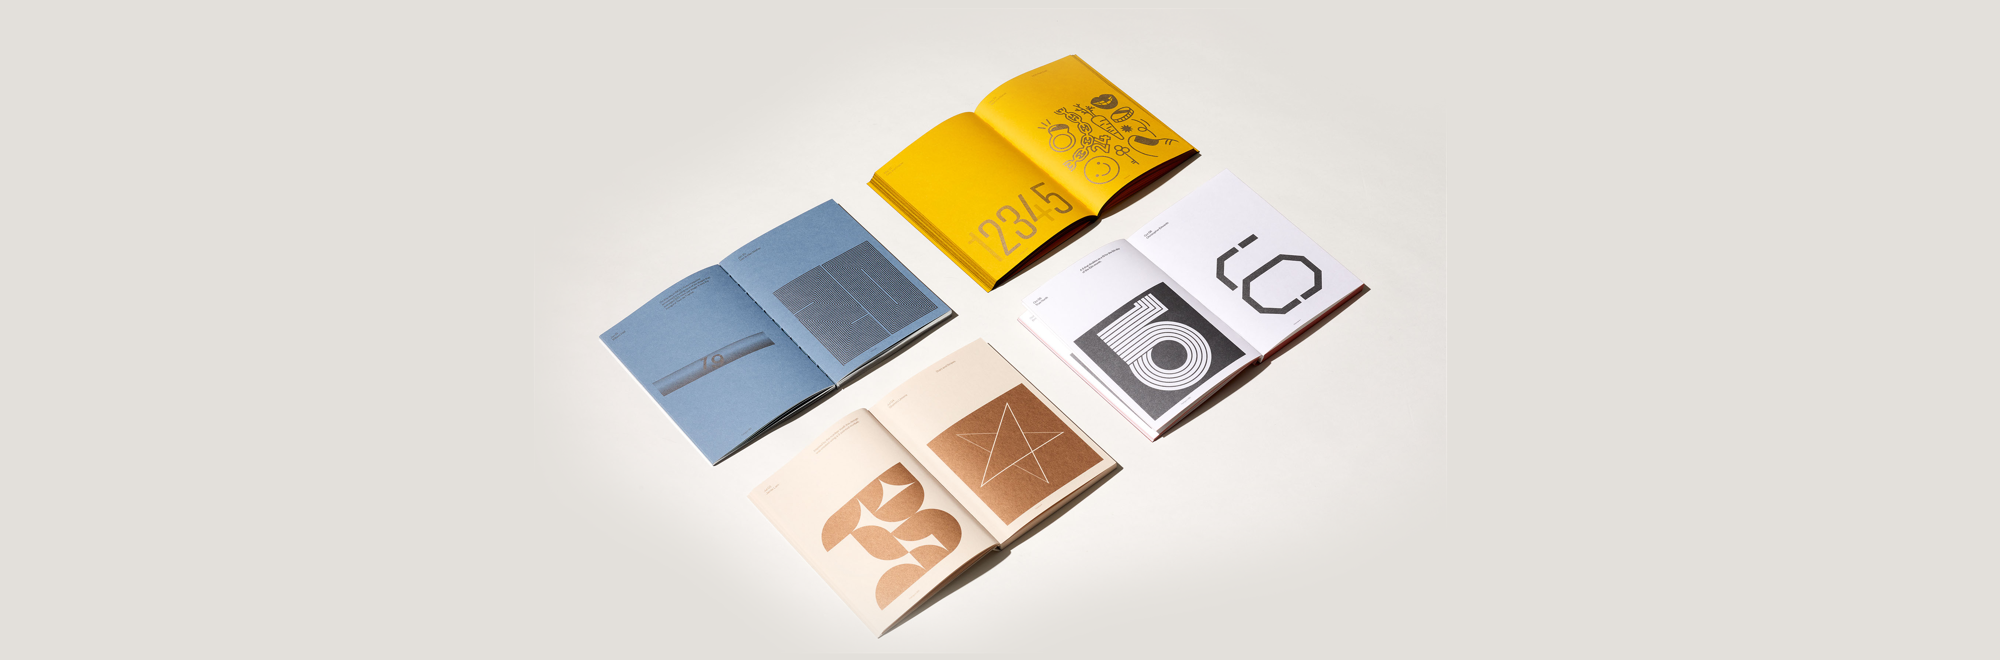 Fedrigoni UK launches its annual 365 calendar project, creating an educational toolkit for new designers